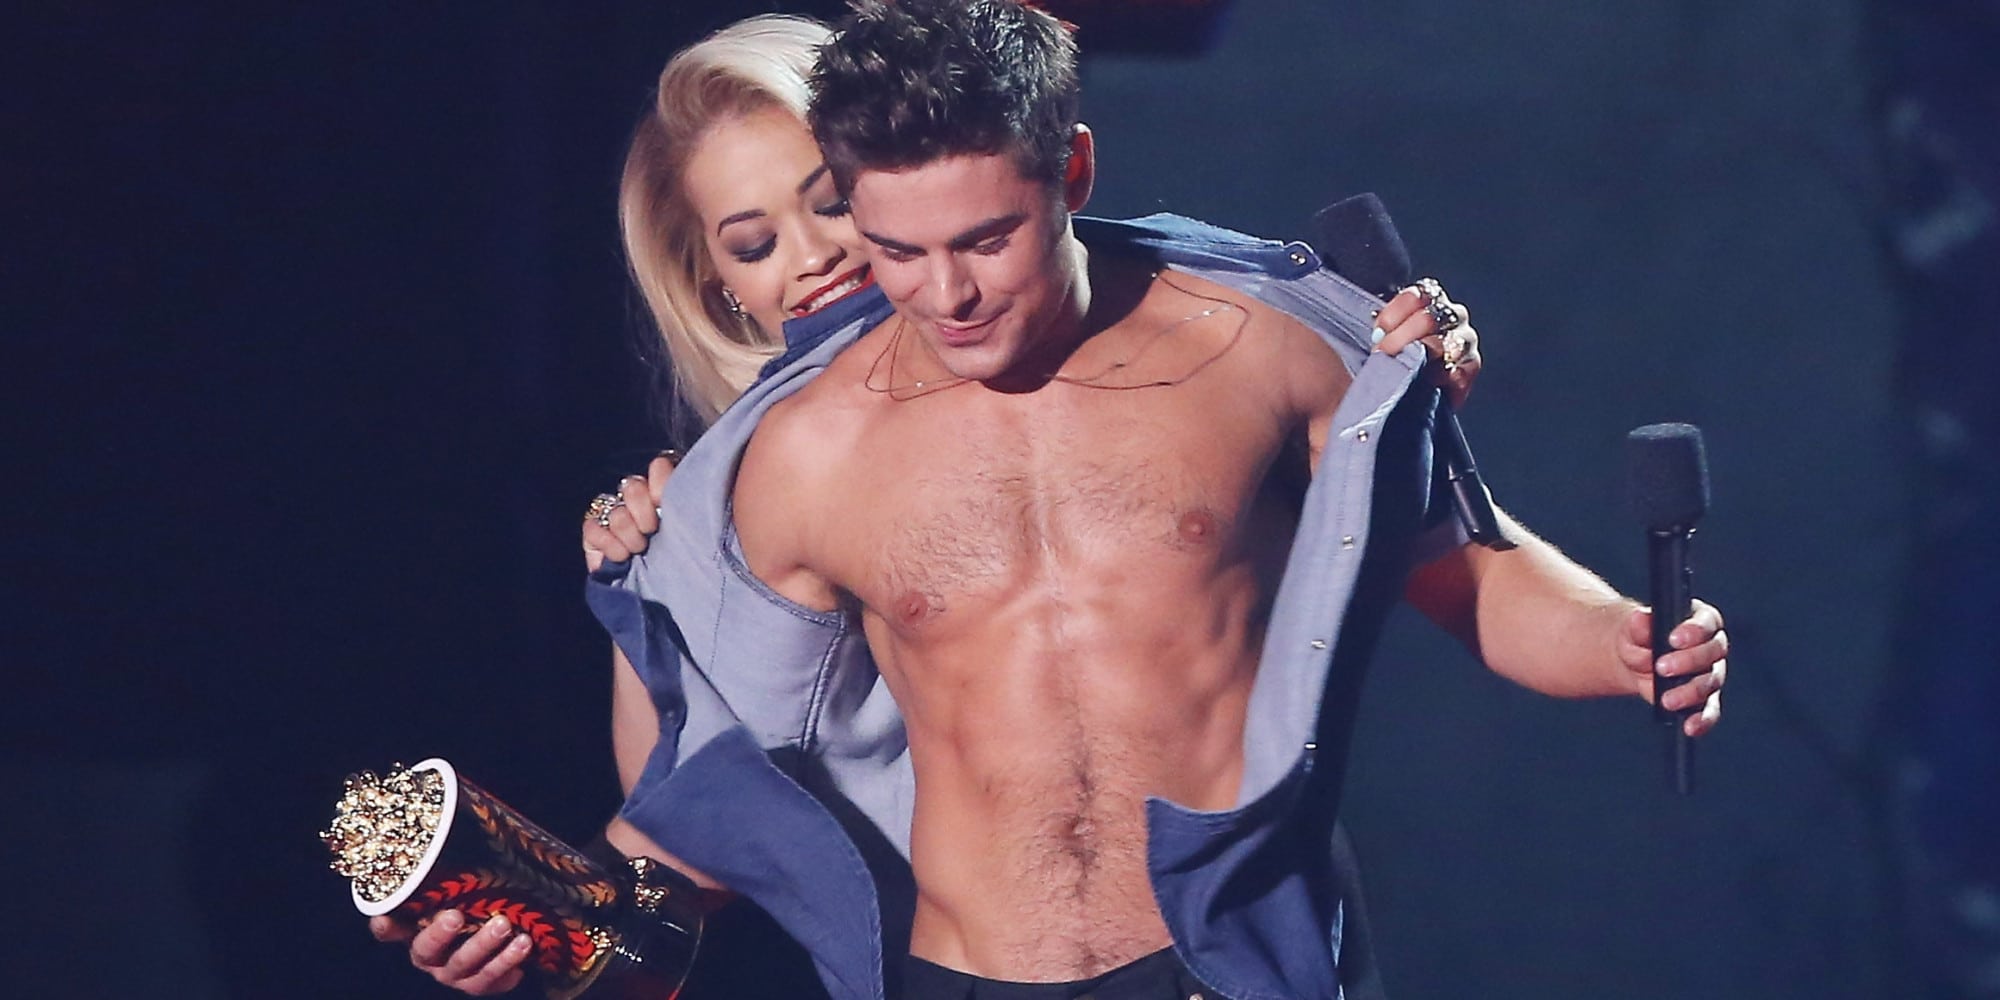 Zac Efron Nude Scene in Extremely Wicked, Shockingly Evil and Vile 